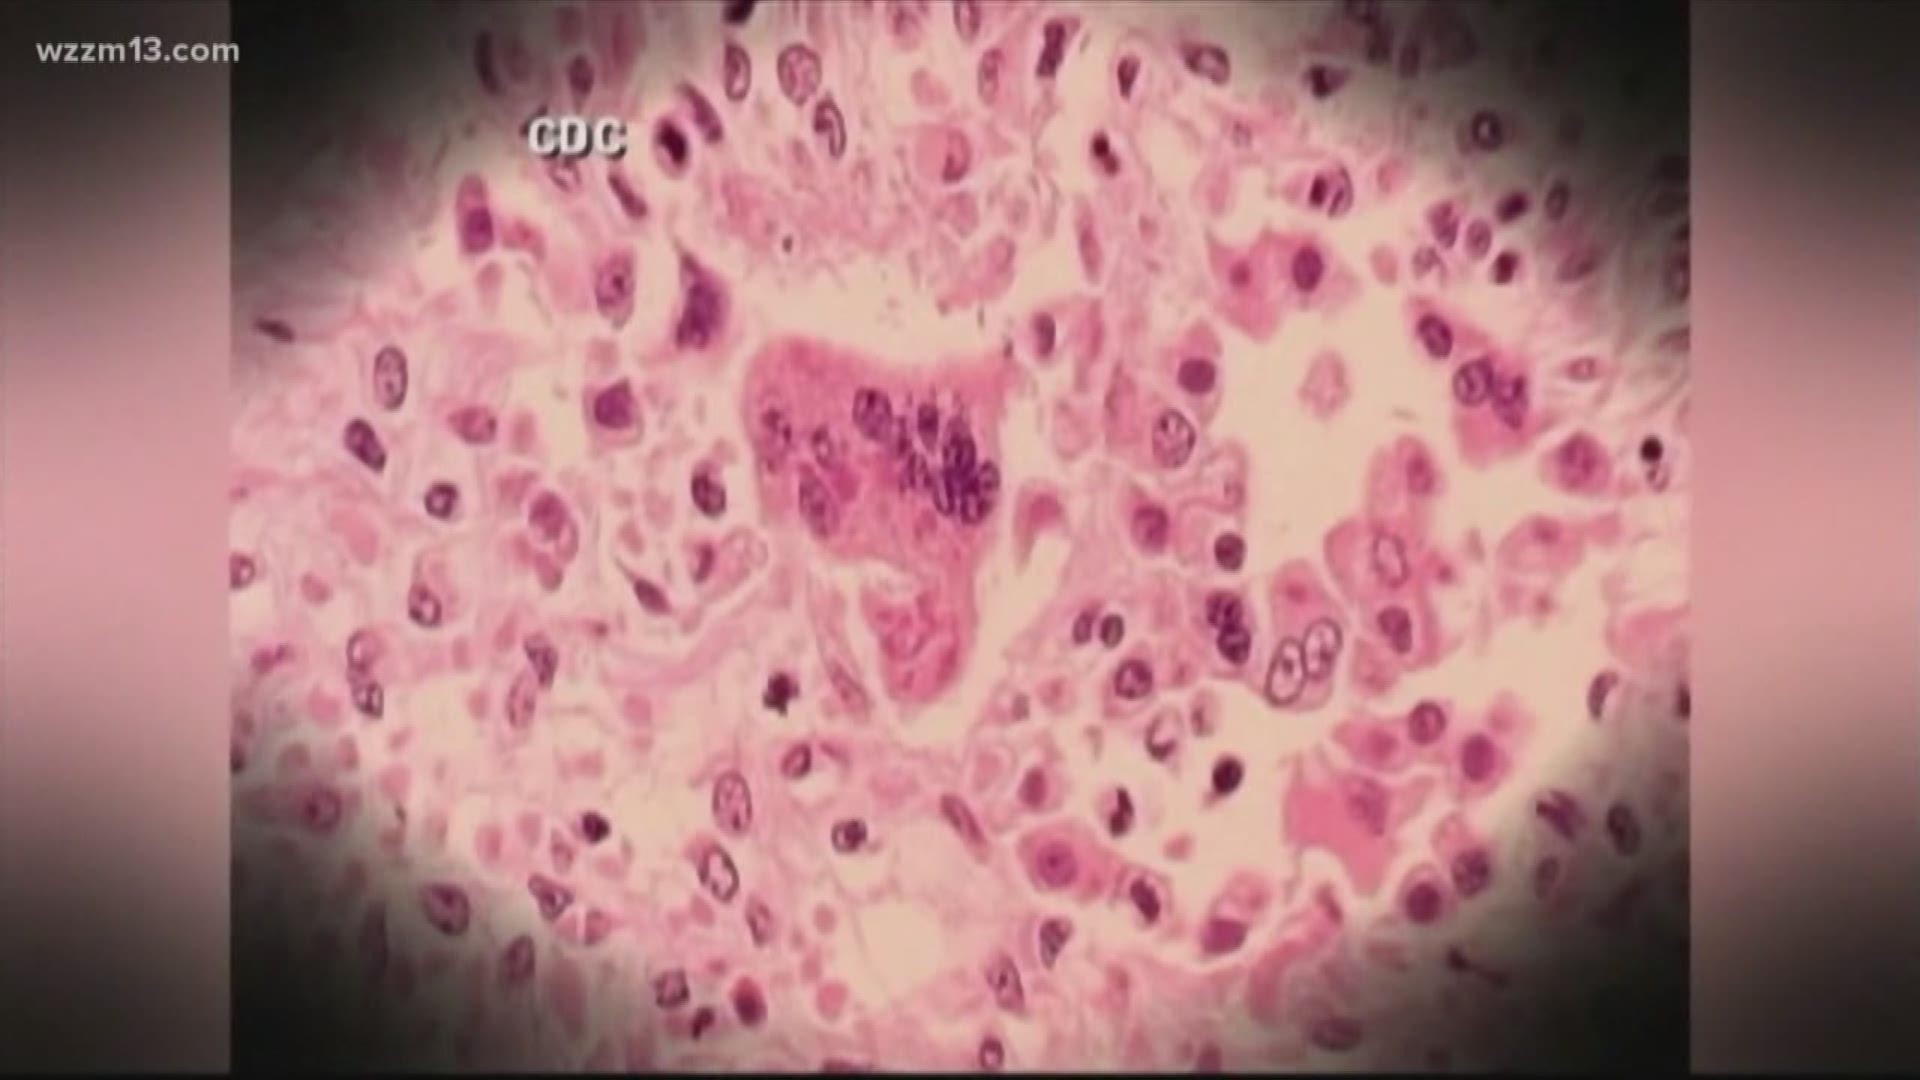 Officials urge vaccination after 15 Michigan measles cases